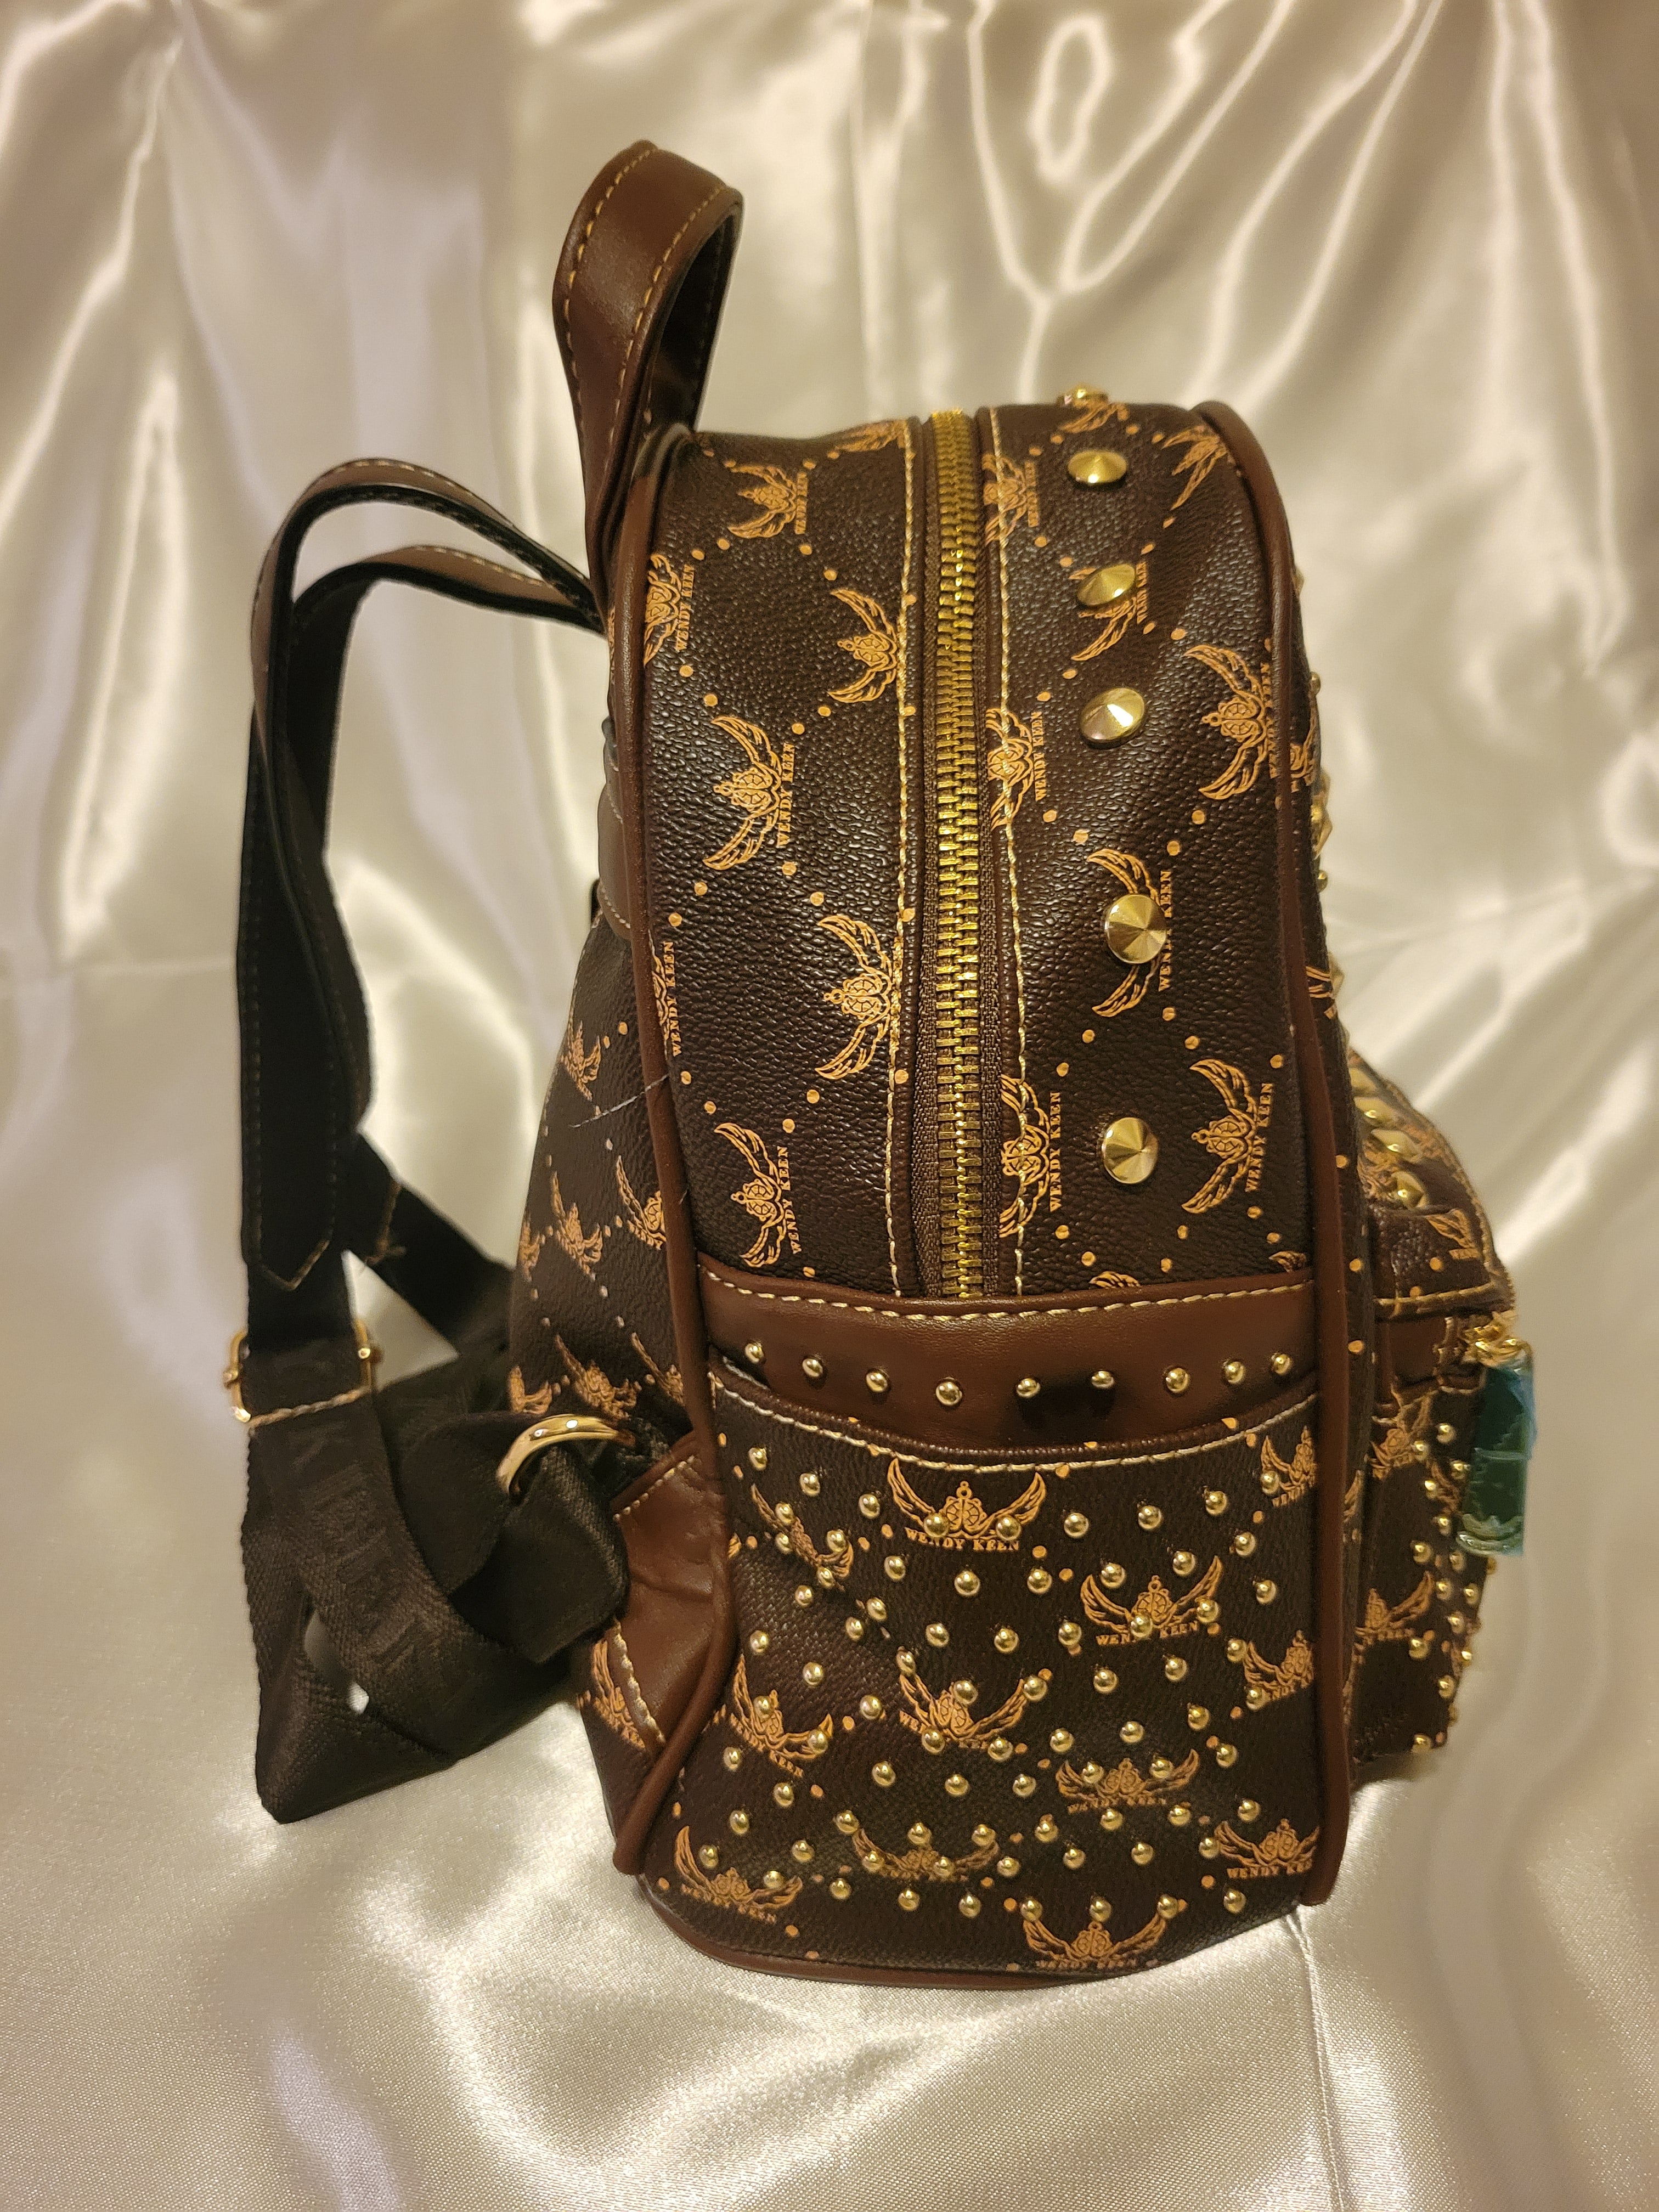 Wendy Keen Leather Back Pack Purse for Sale in Brooklyn, NY - OfferUp